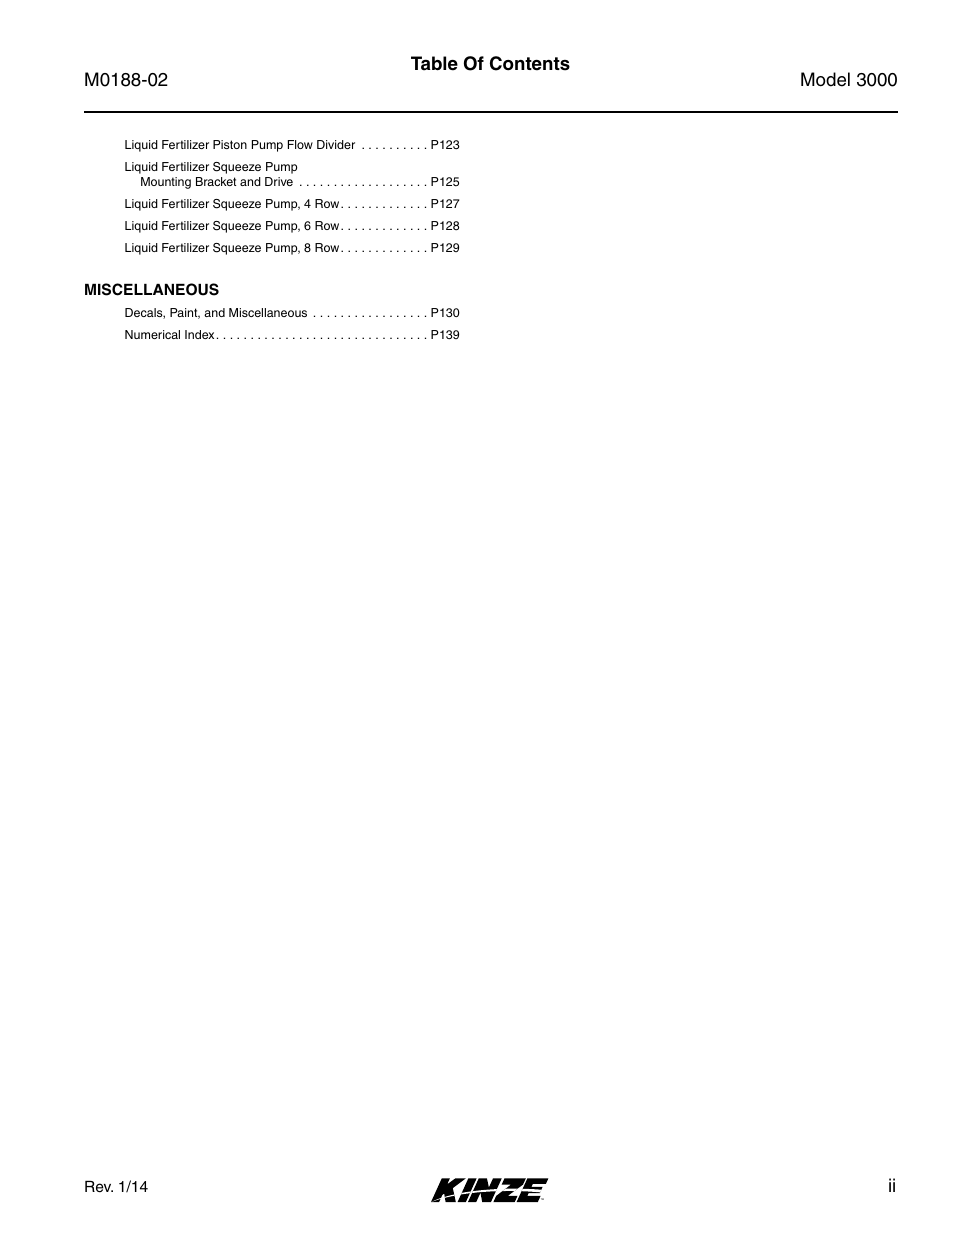 Ii table of contents | Kinze 3000 Rigid Frame Planter Rev. 5/14 User Manual | Page 3 / 154